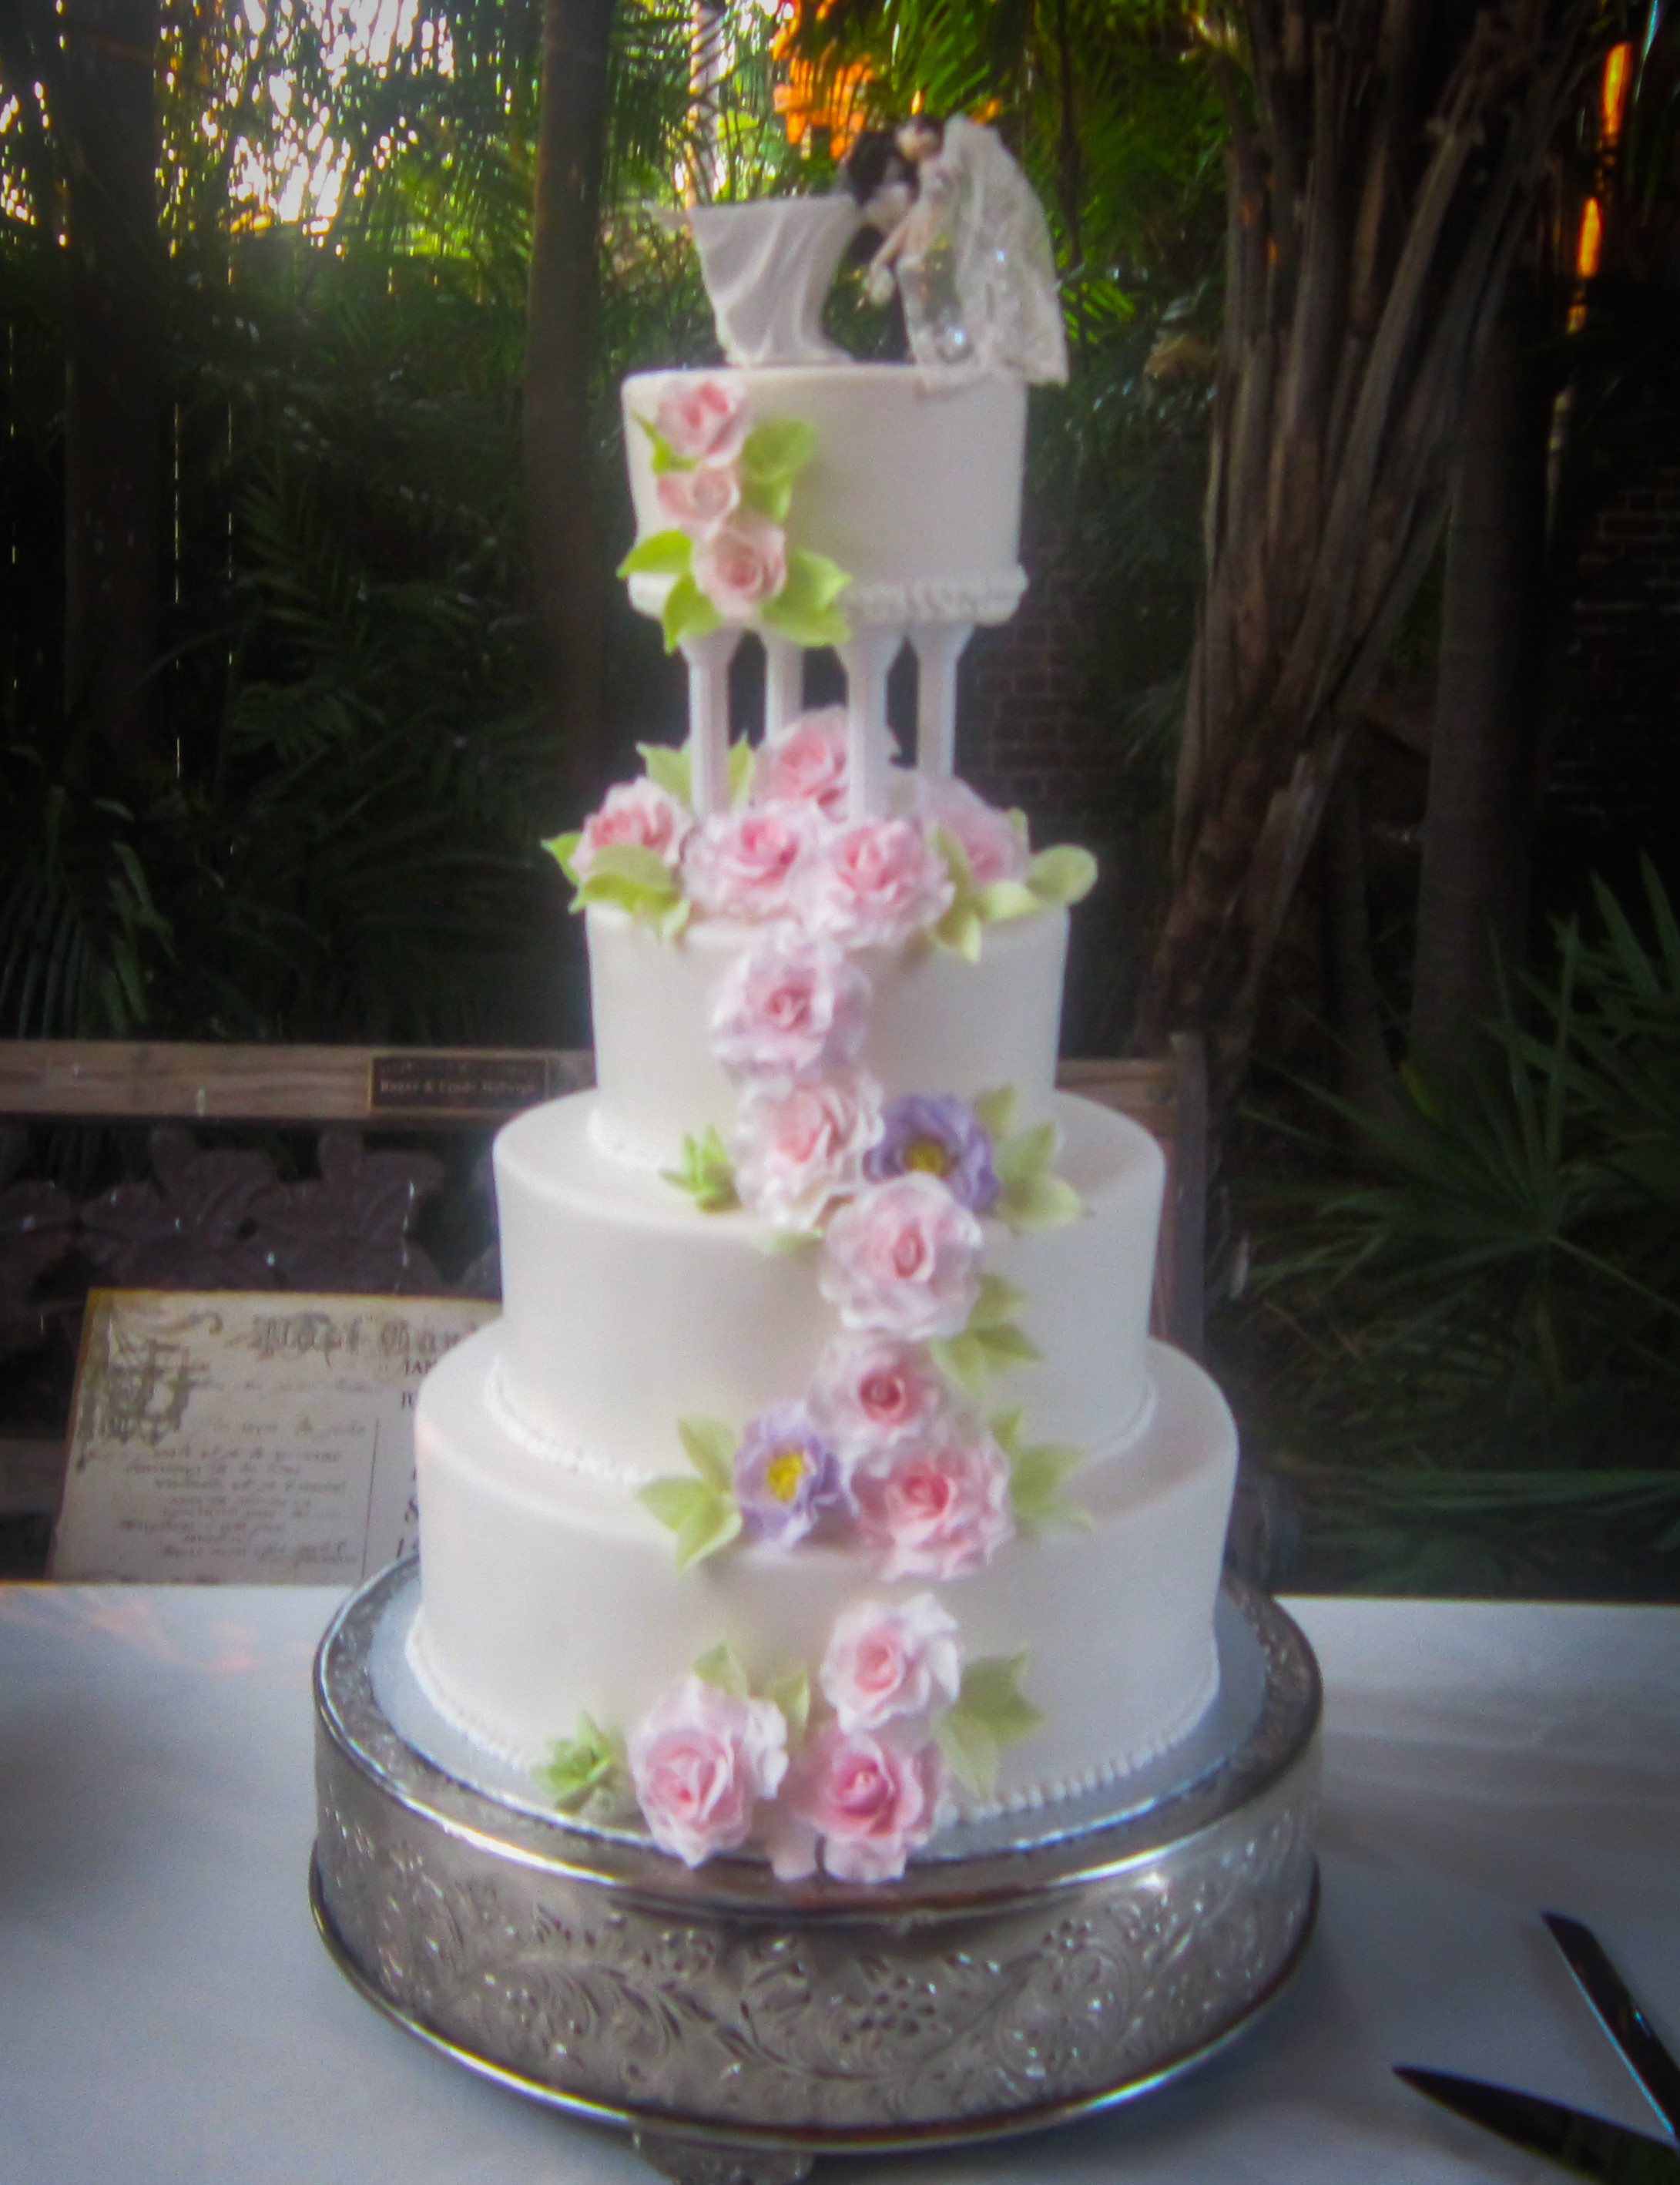 I Do Wedding Cakes
 Amazing Cakes and Creations – Key West Cakes and Specialty